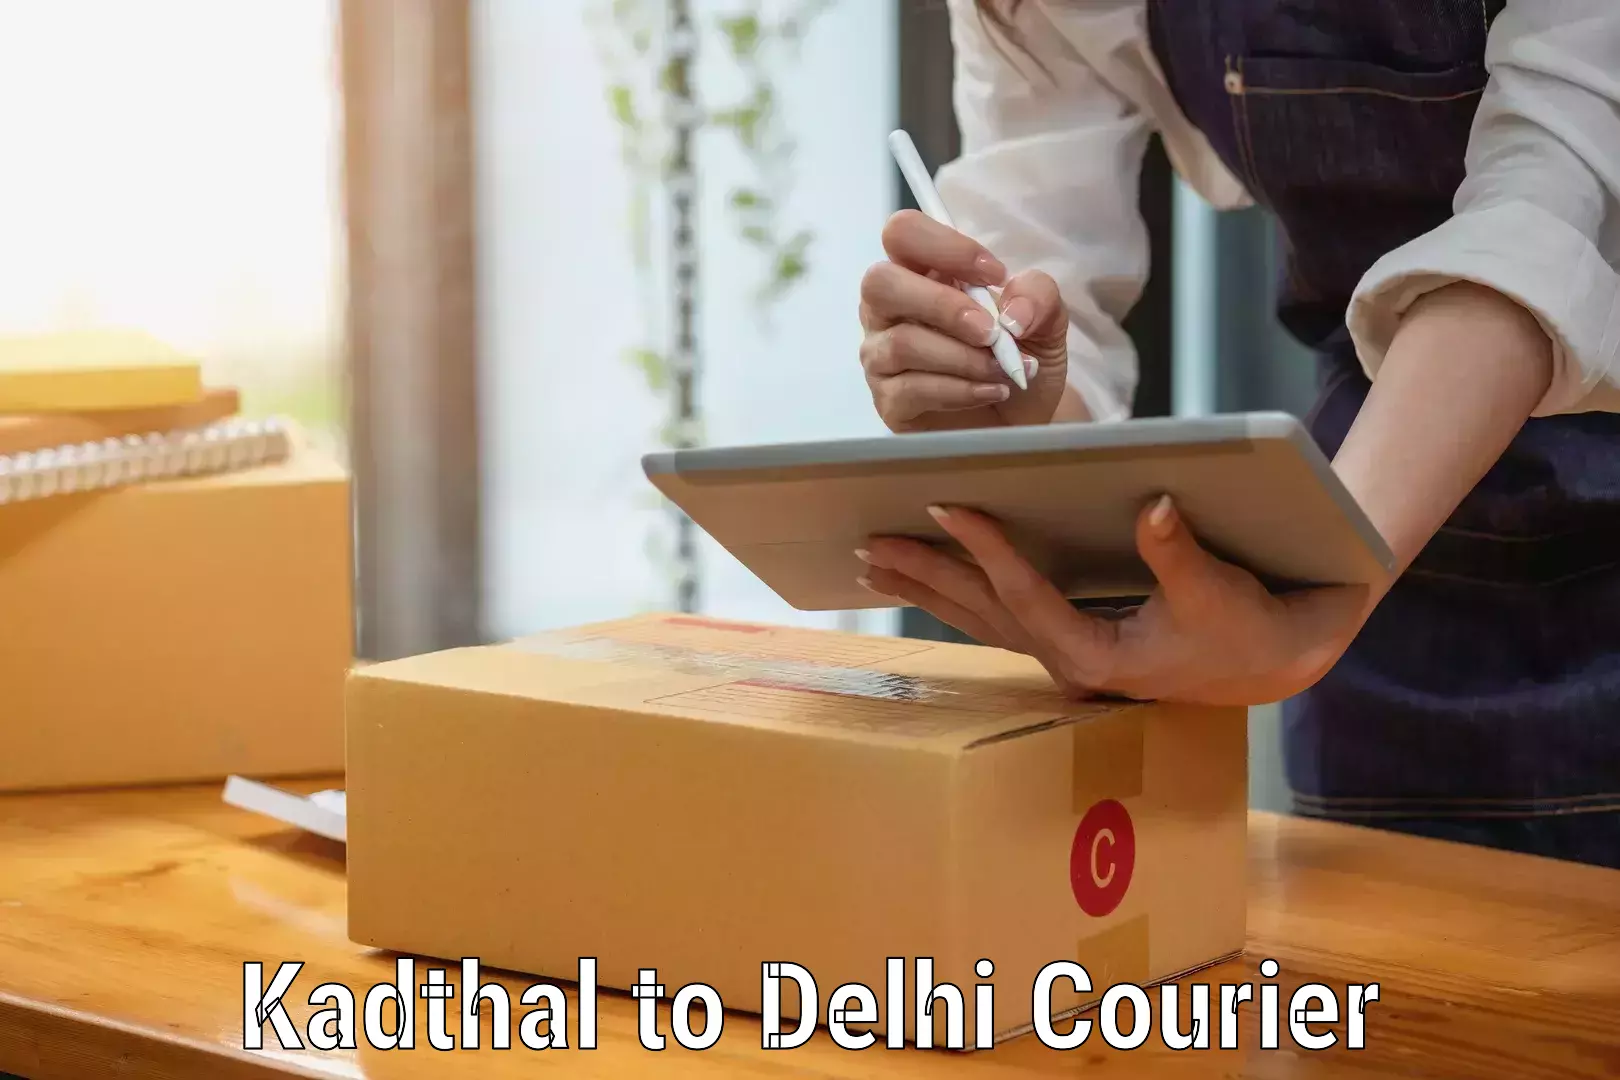 Trusted relocation experts Kadthal to East Delhi